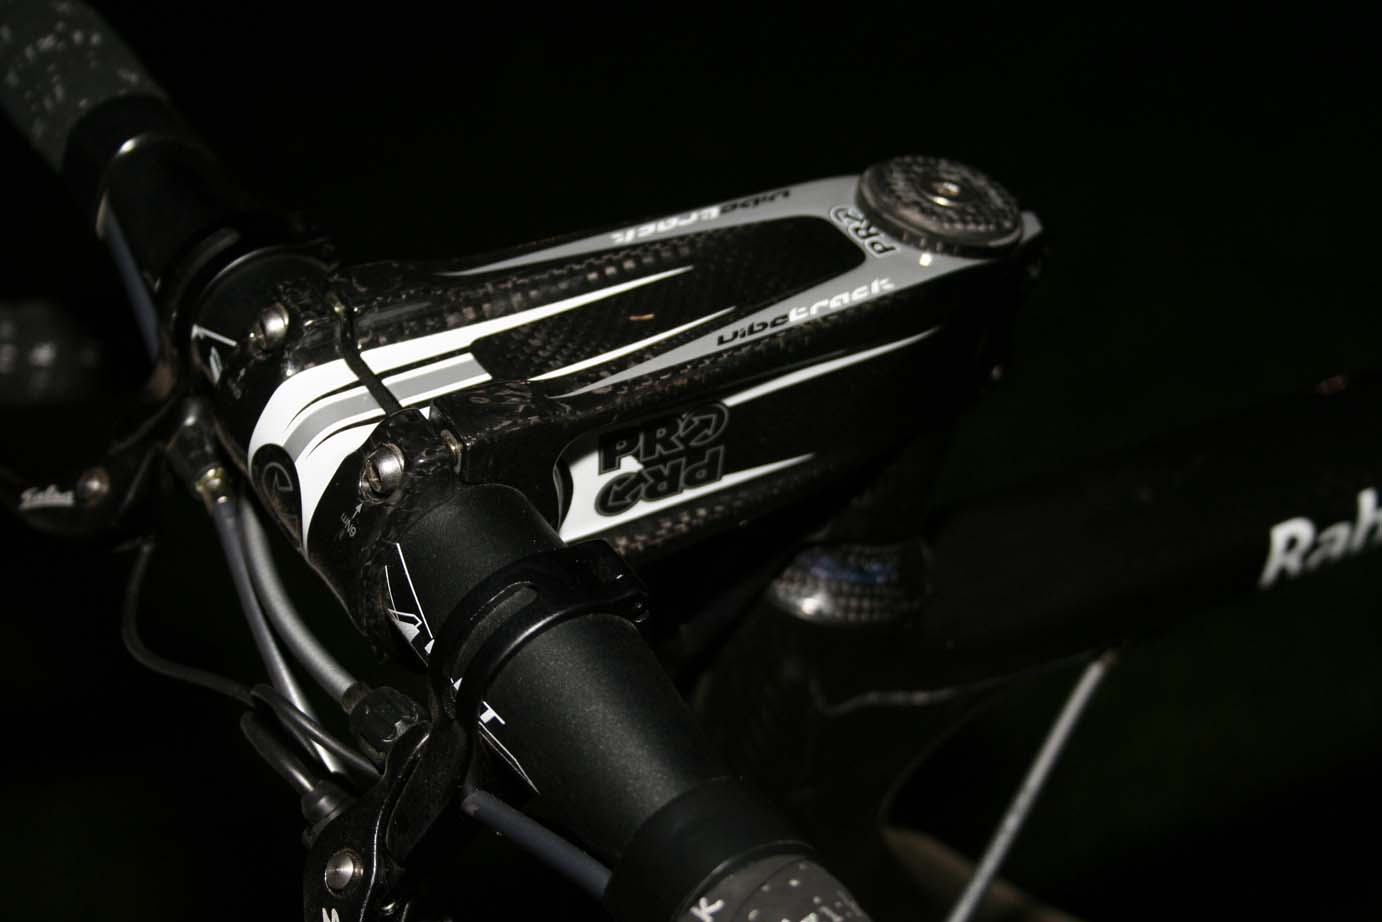 Pro provided a beefy downhill stem, just to be safe. by Andrew Yee